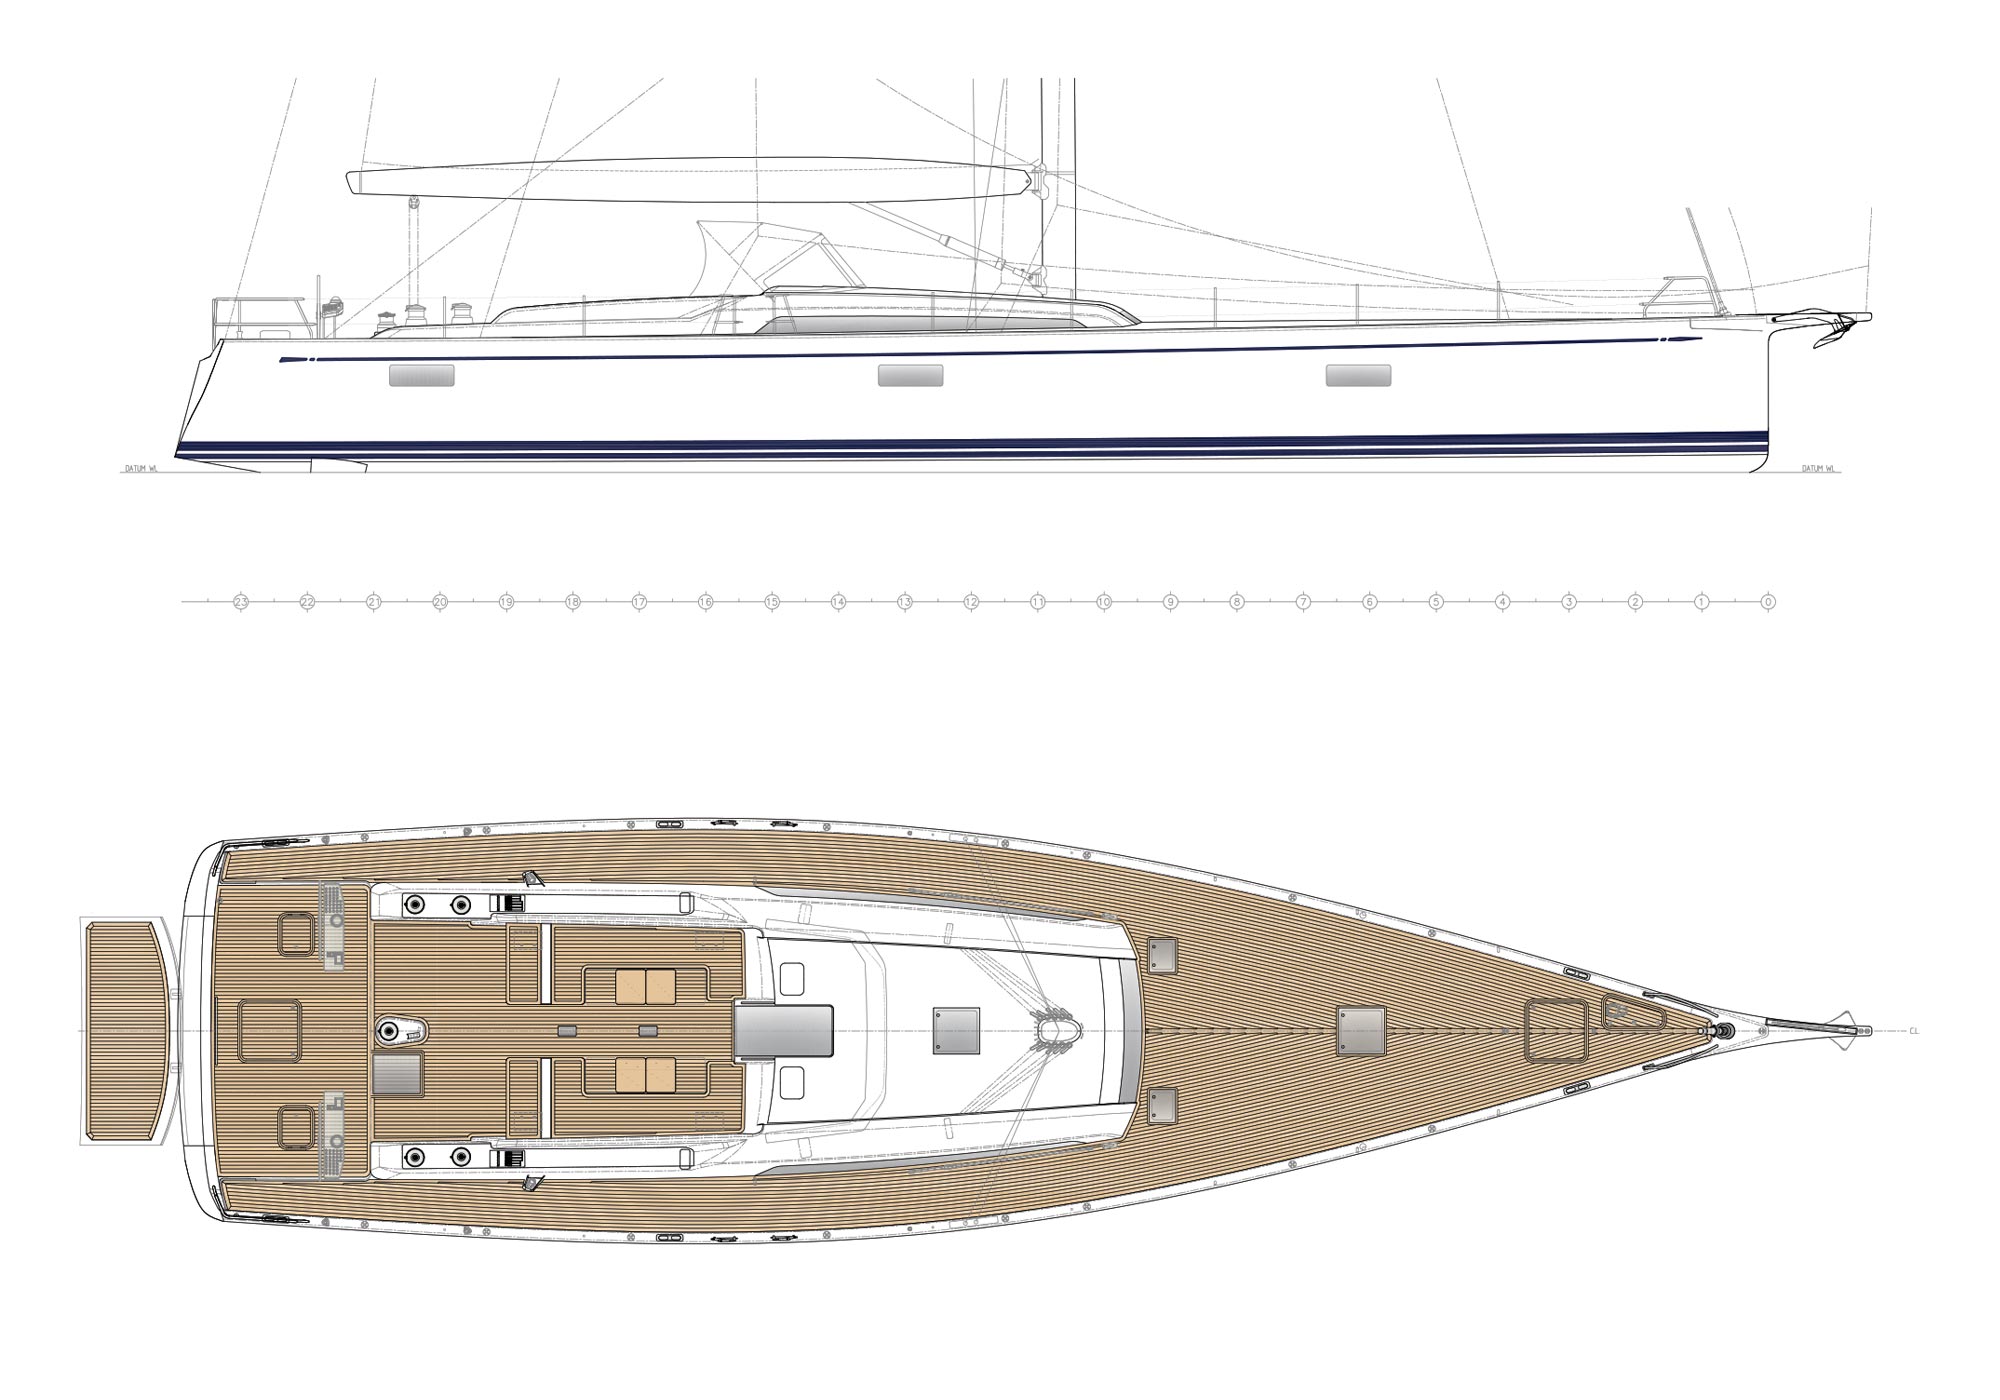 78 ft yacht cost